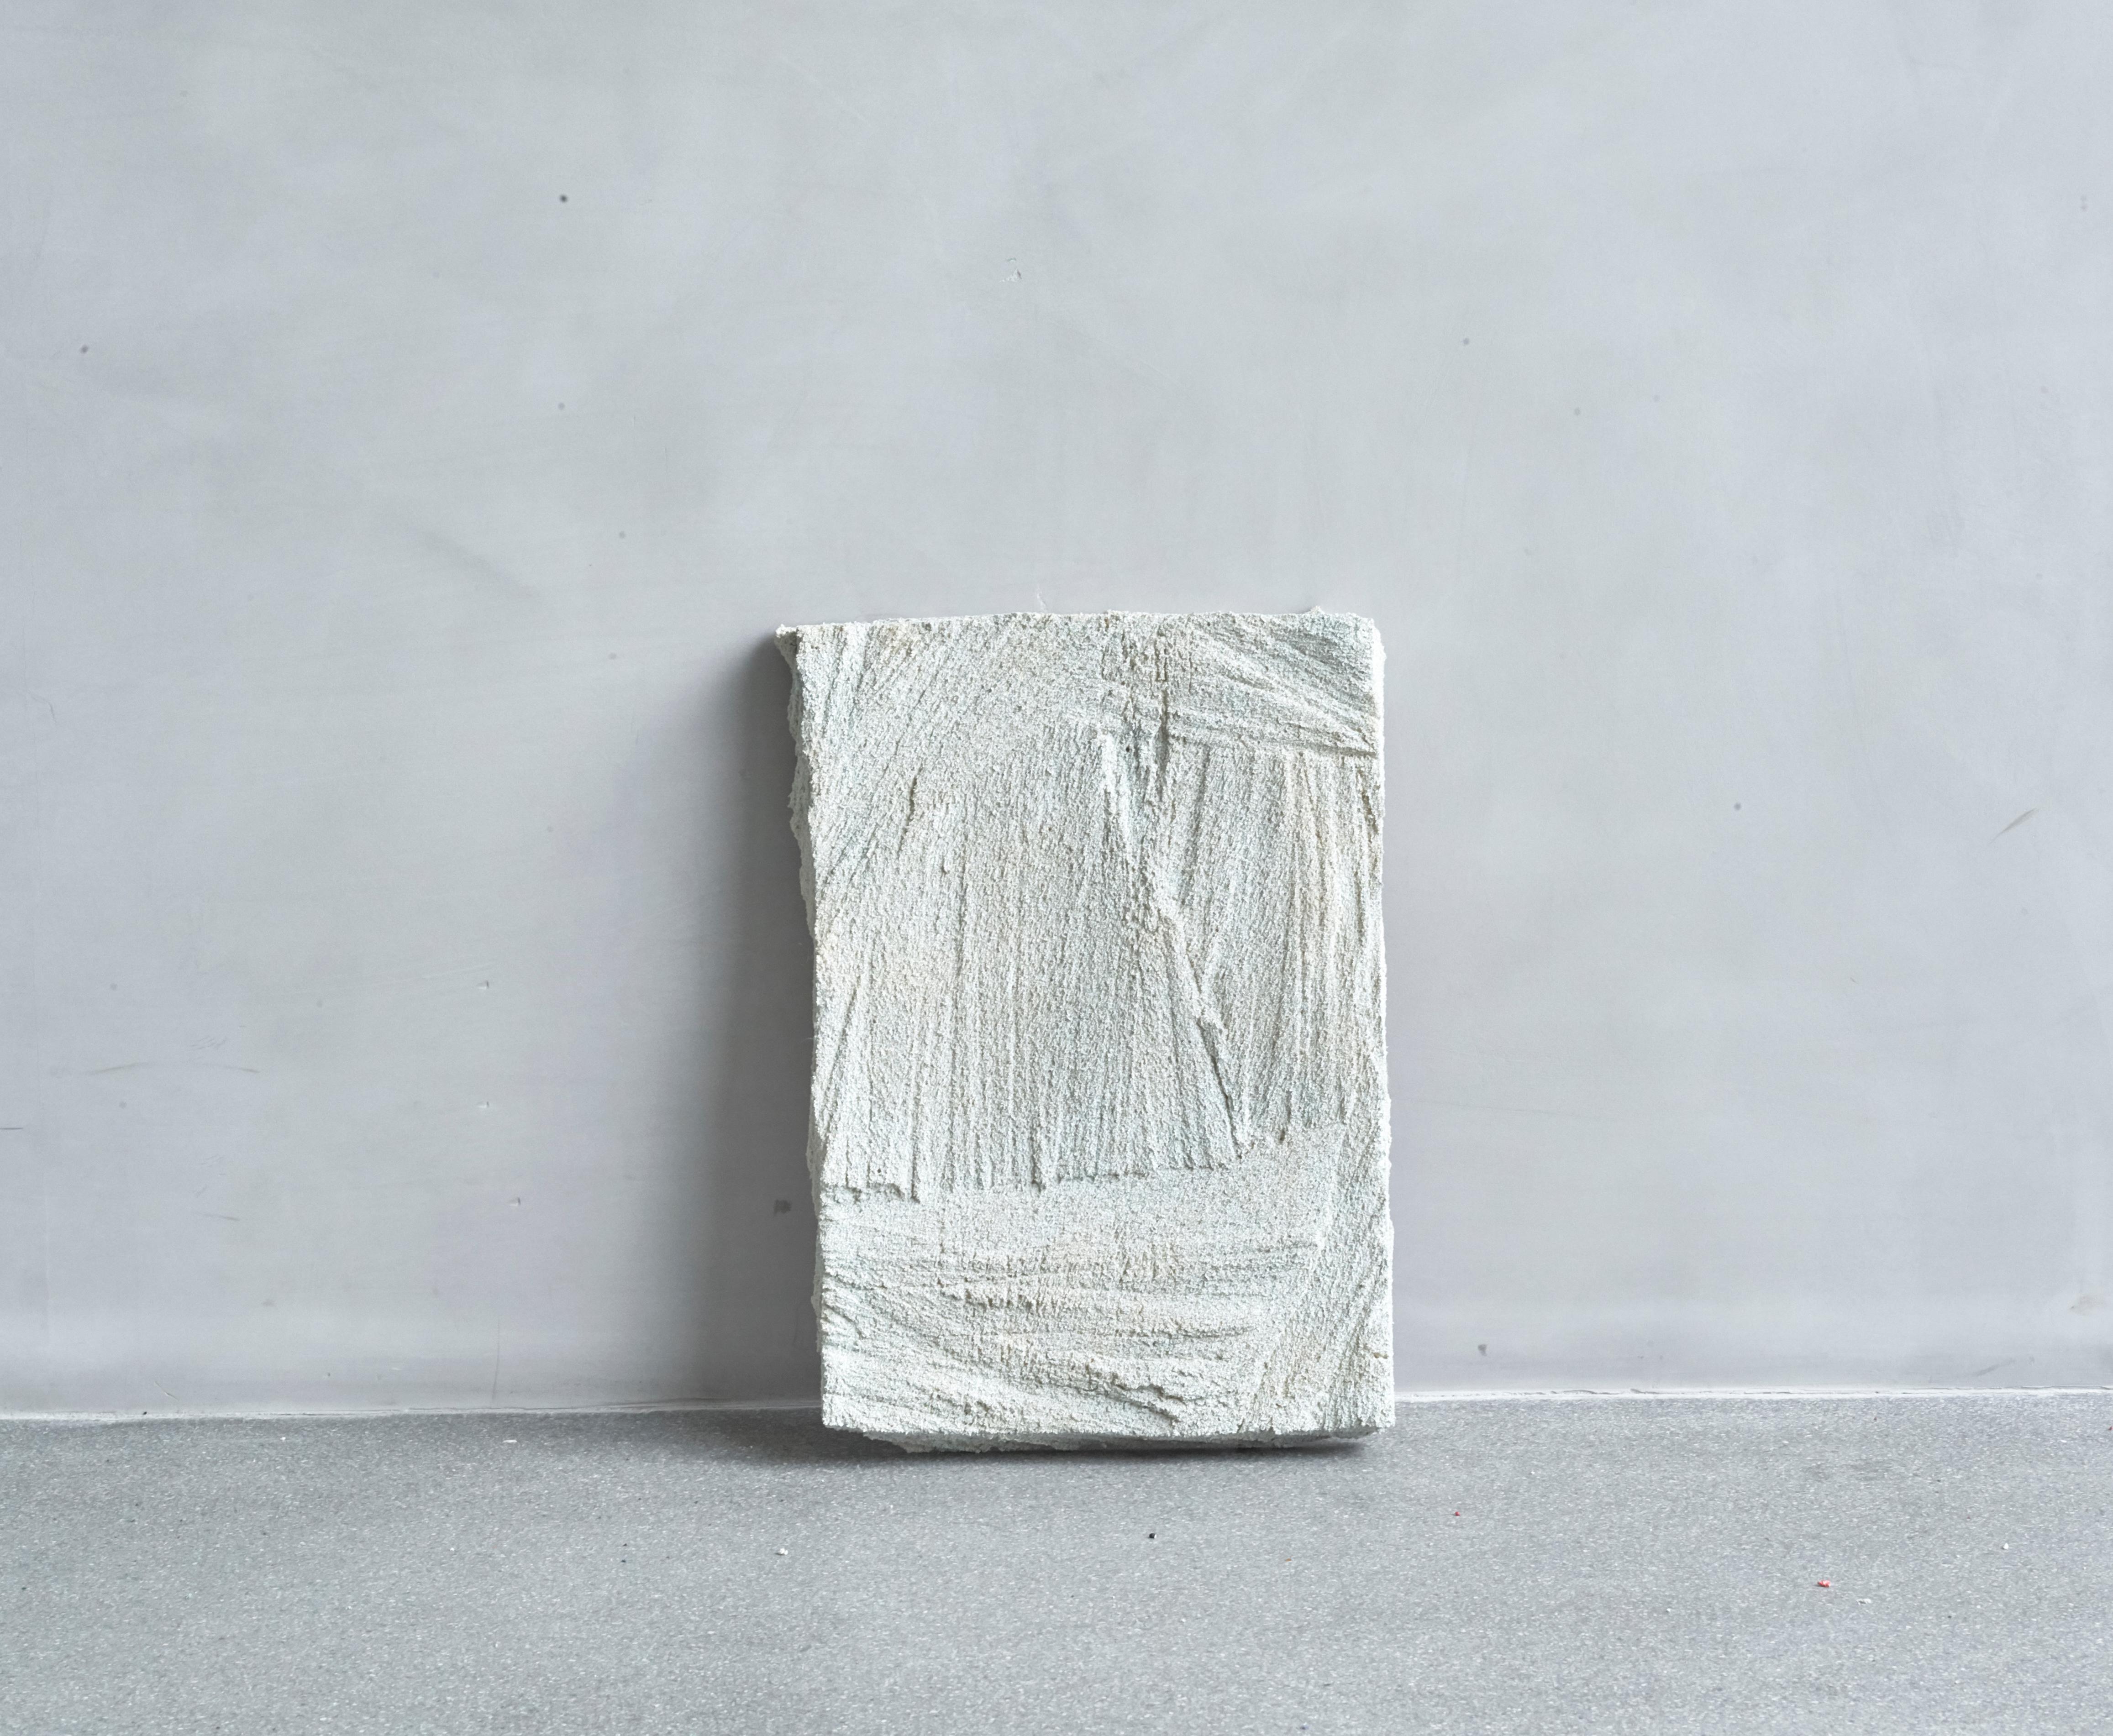 Rock Pond wall piece by Andredottir & Bobek
Dimensions: W 320 x H 450 cm
Materials: Reused Foam/mattress and Jesmontite Hardner in Color Grey

Artificial Nature is a collaboration between the artist and design duo Josephine Andredottir and Emilie